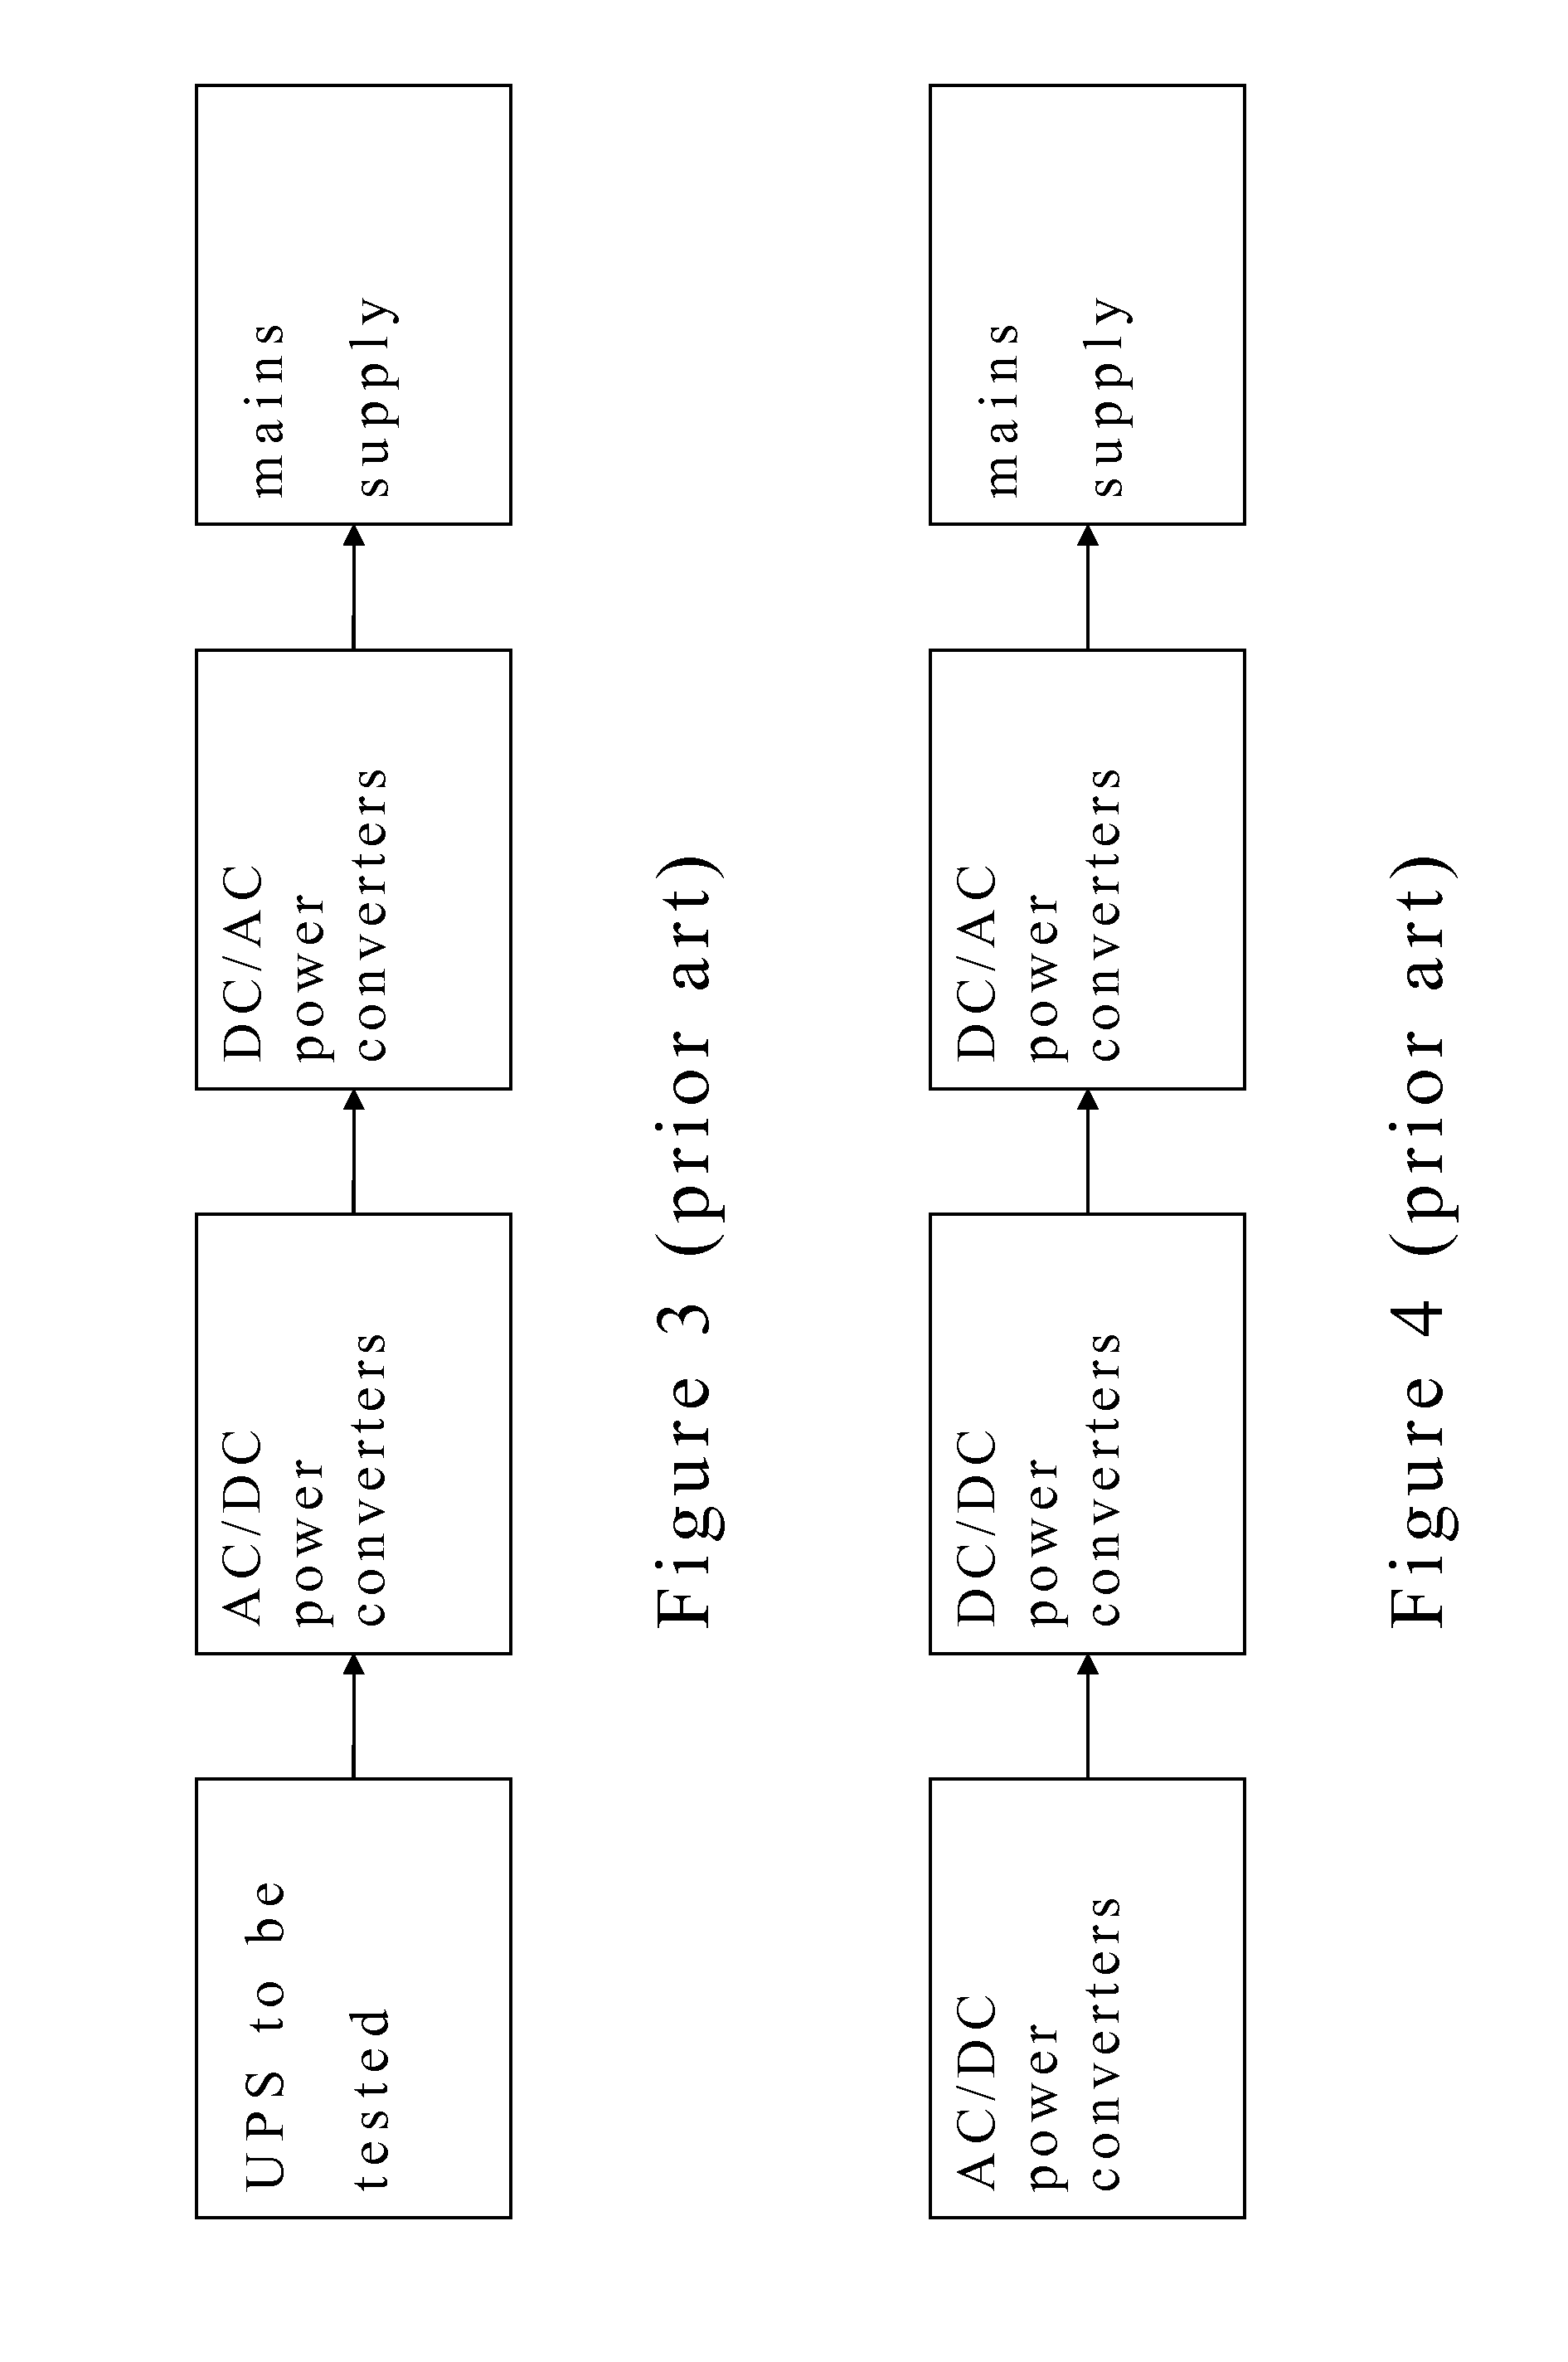 Burn-in test apparatus with function of energy recycling